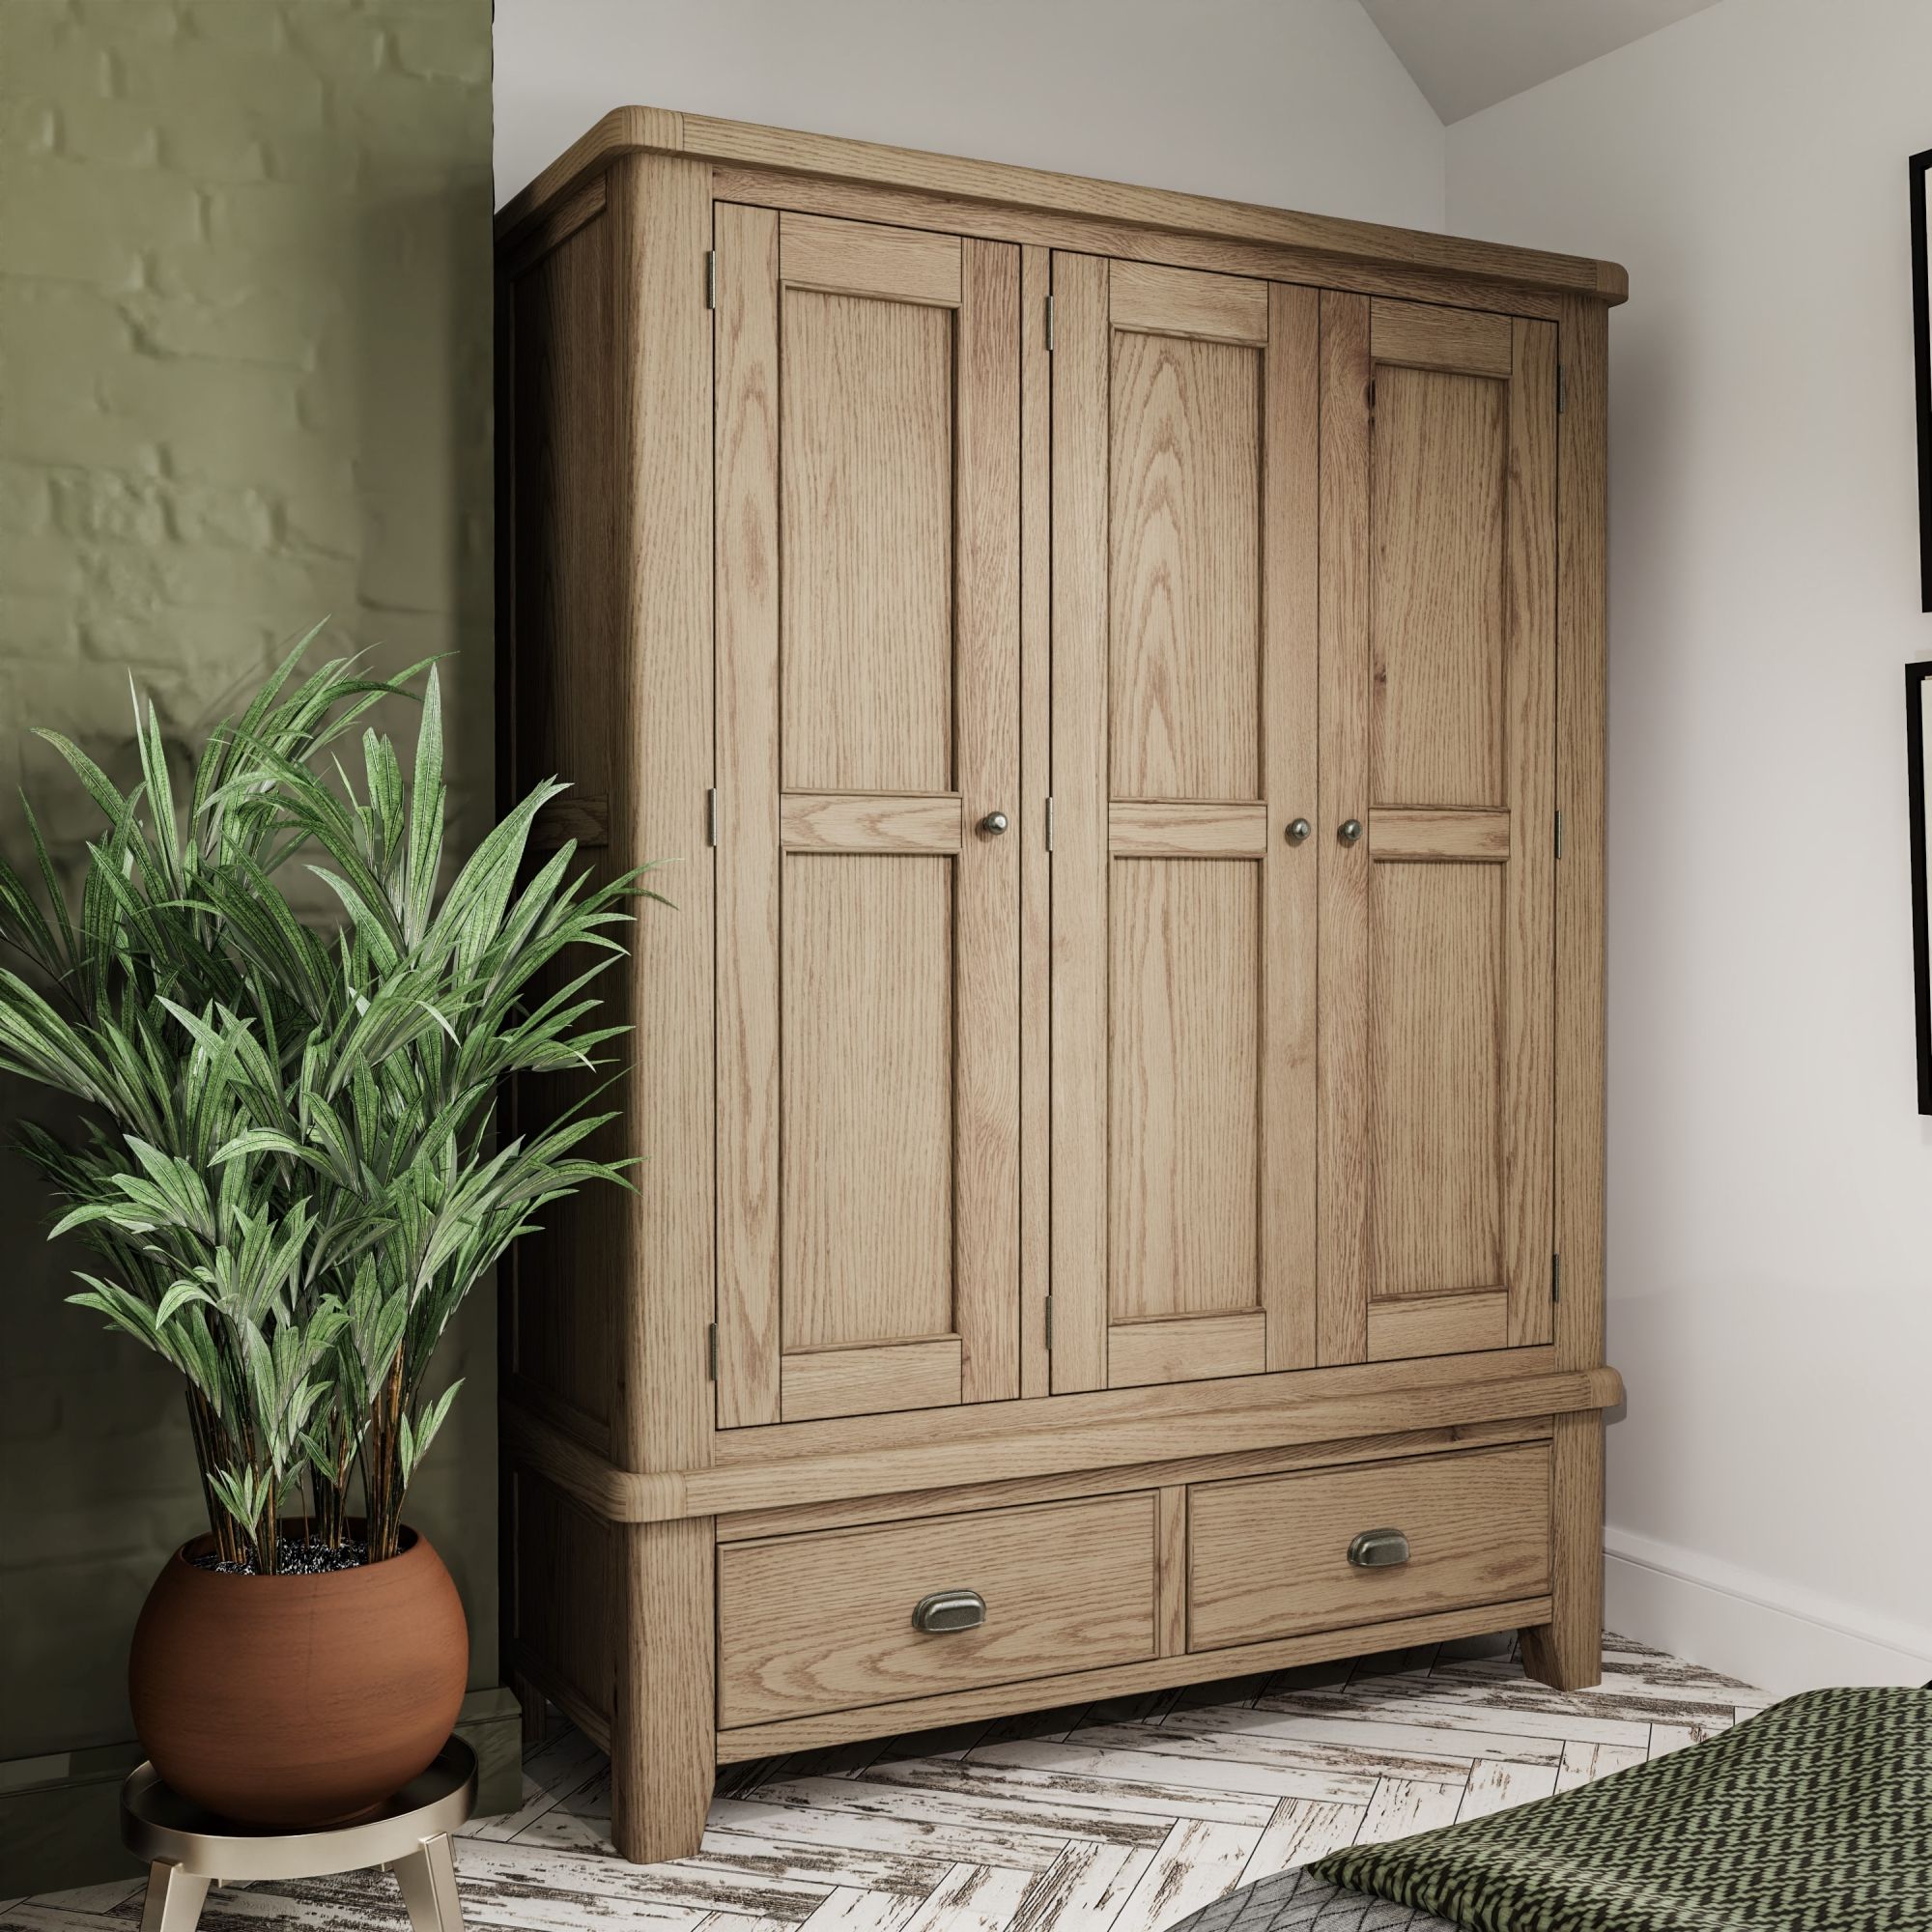 Smoked Oak 3 Door Wardrobe With 2 Drawers – Furniture World Intended For Oak Wardrobes With Drawers And Shelves (View 10 of 20)